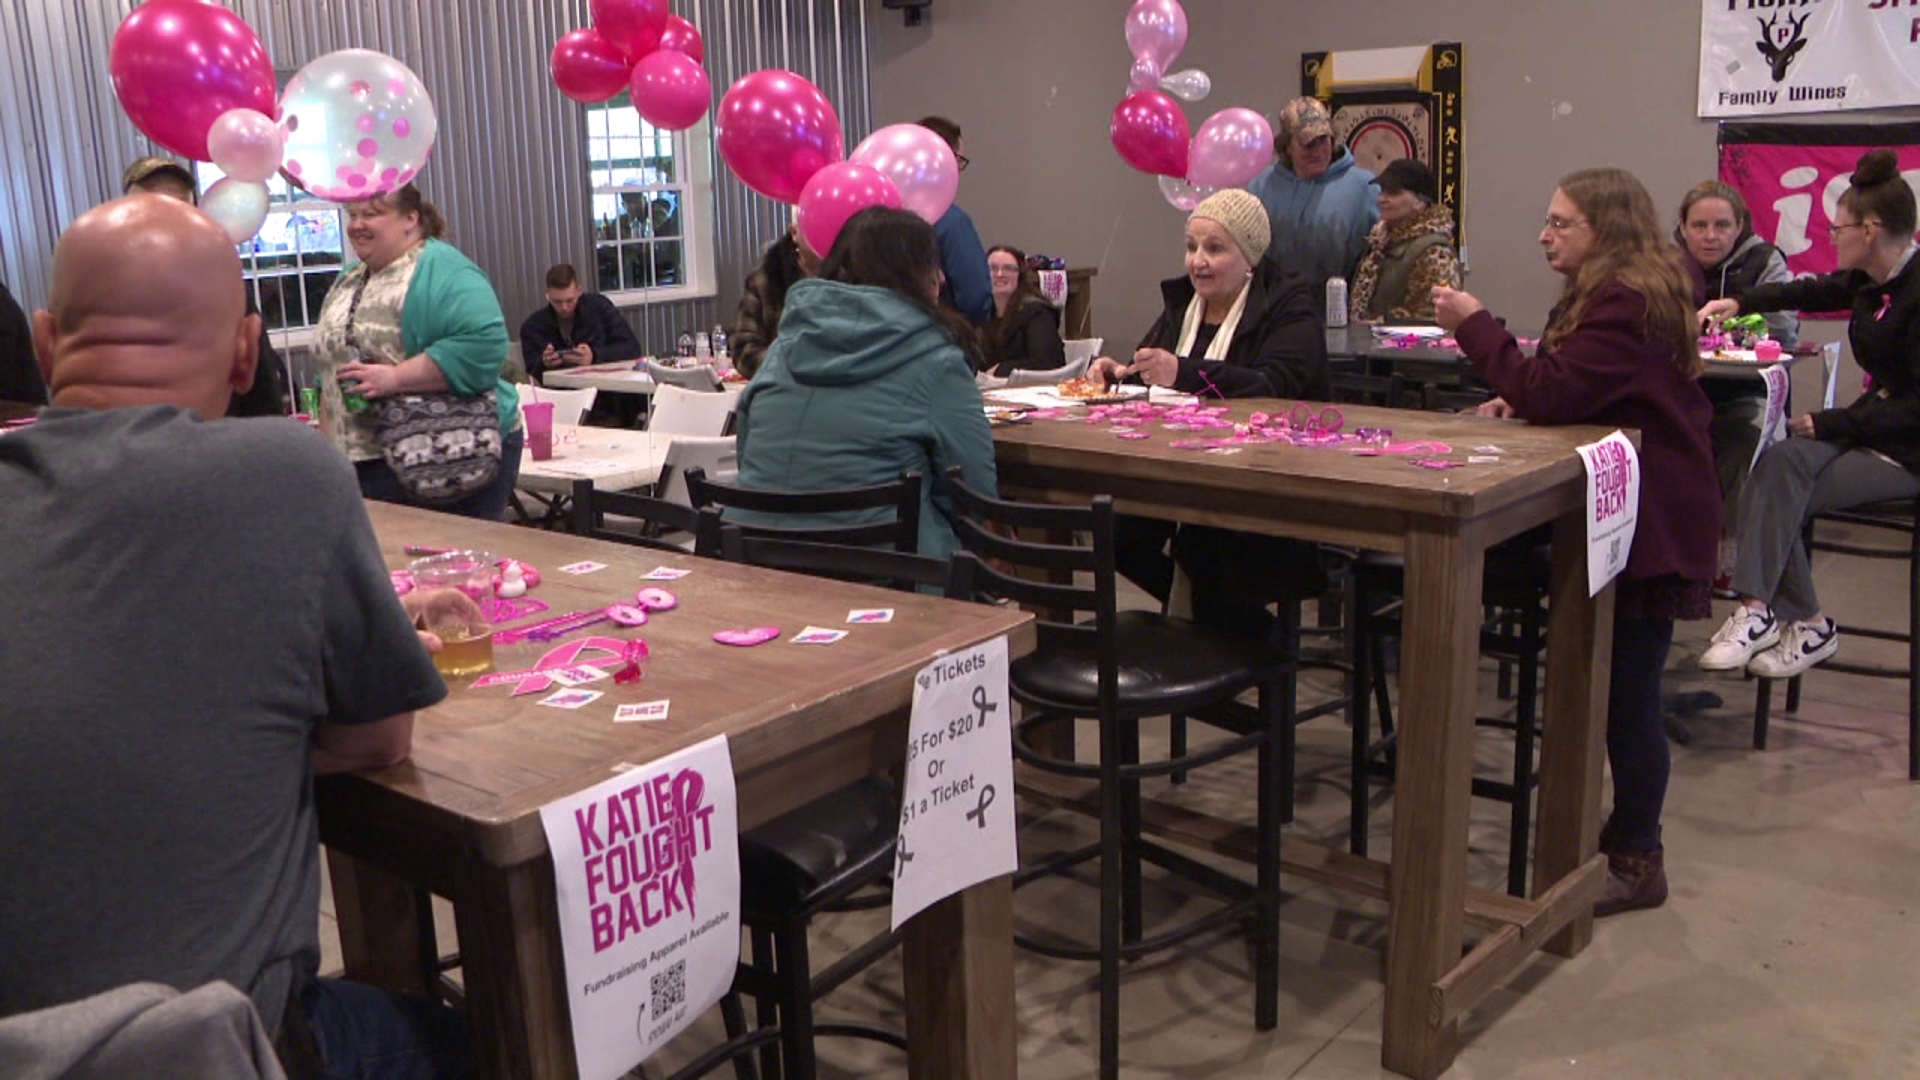 The community in Lehman Township came together to support Katie Poplaski, who is battling breast cancer.